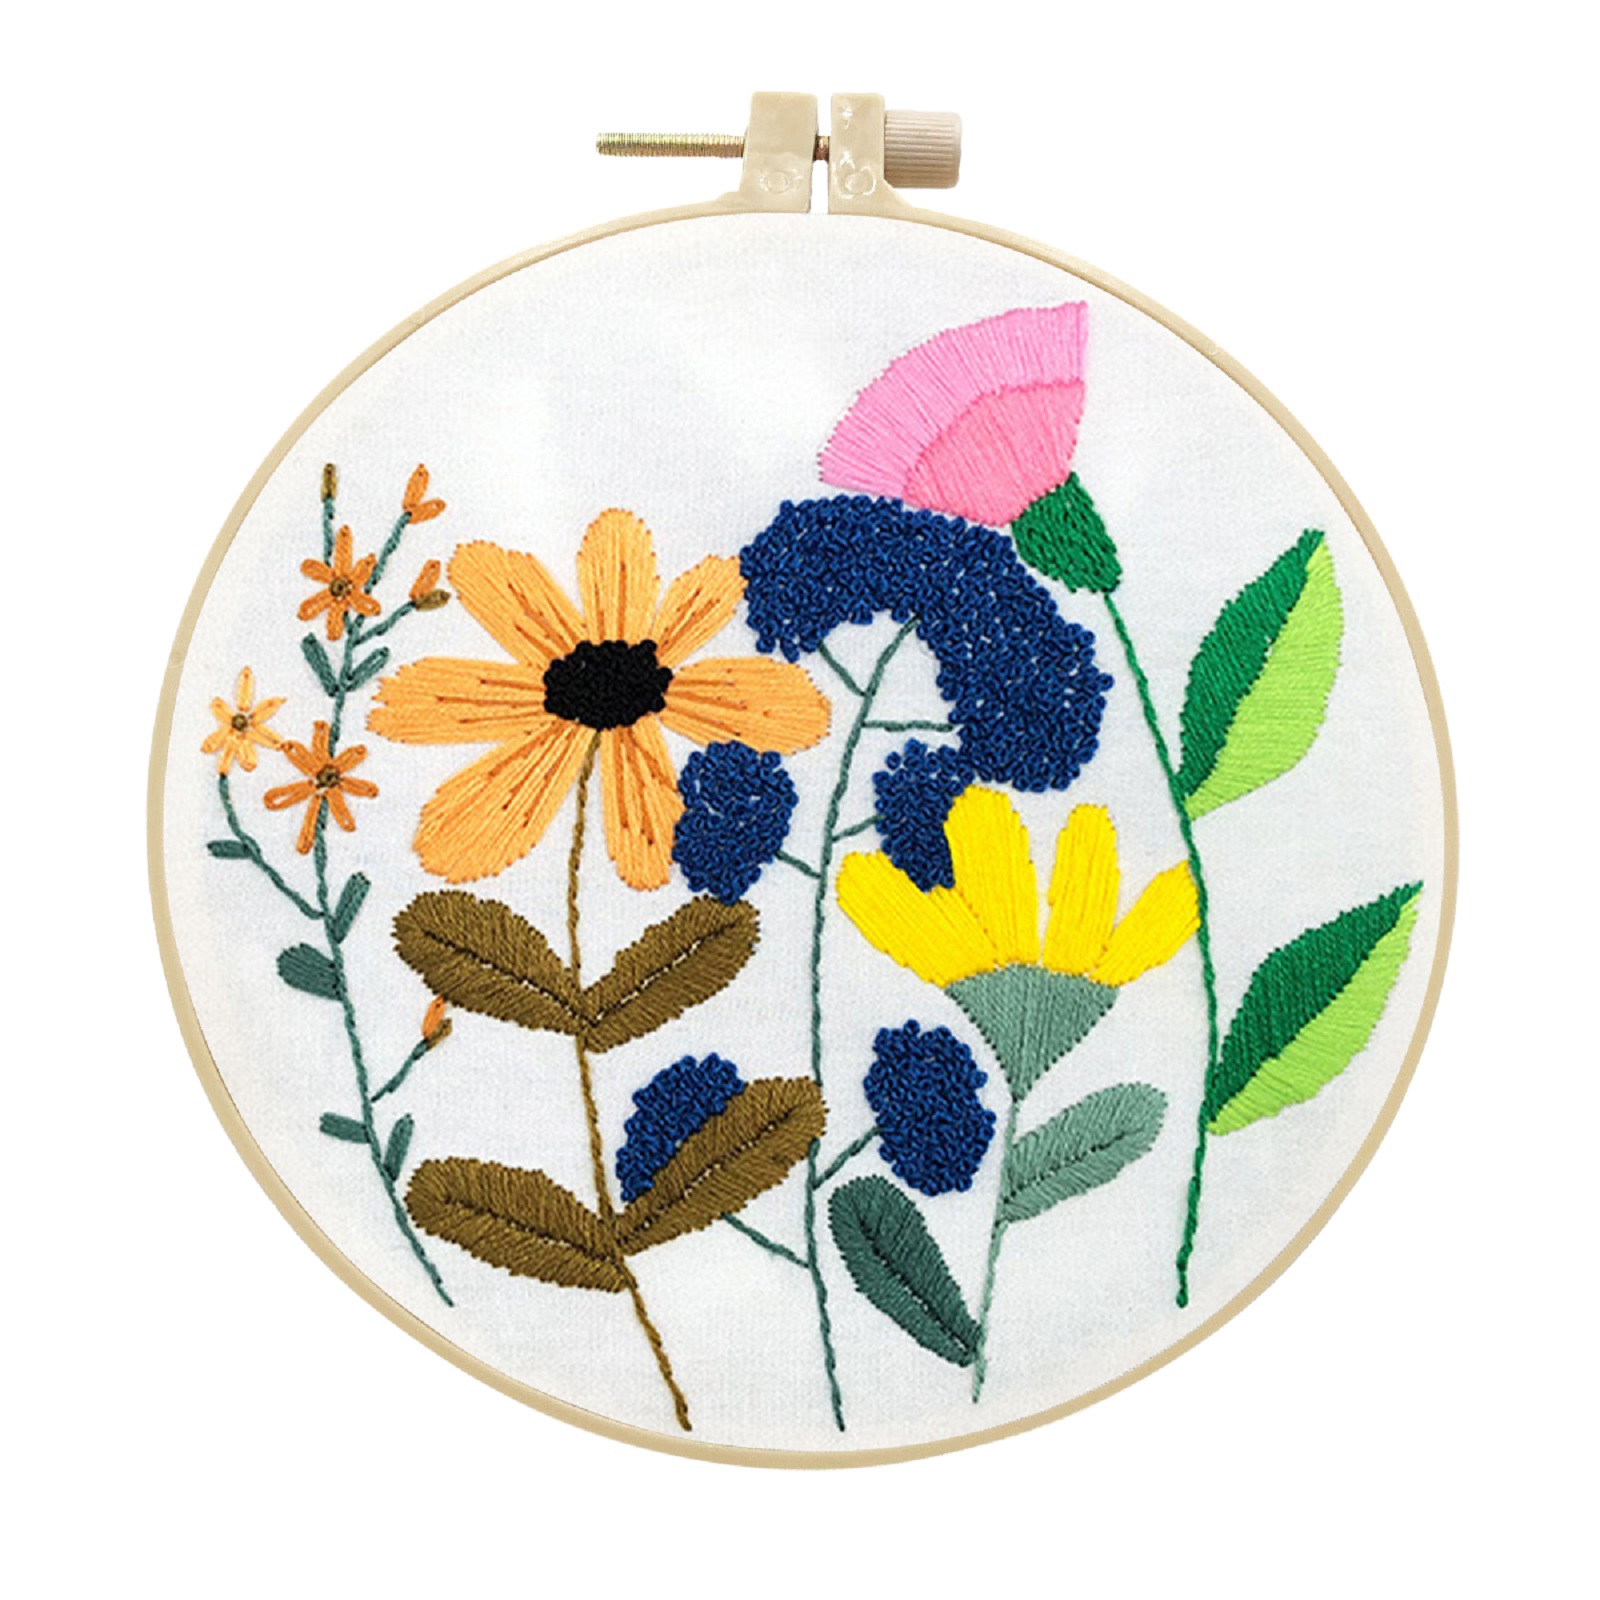 Embroidery Kits Cross stitch kits for Adult Beginner - Wildflowers Pattern